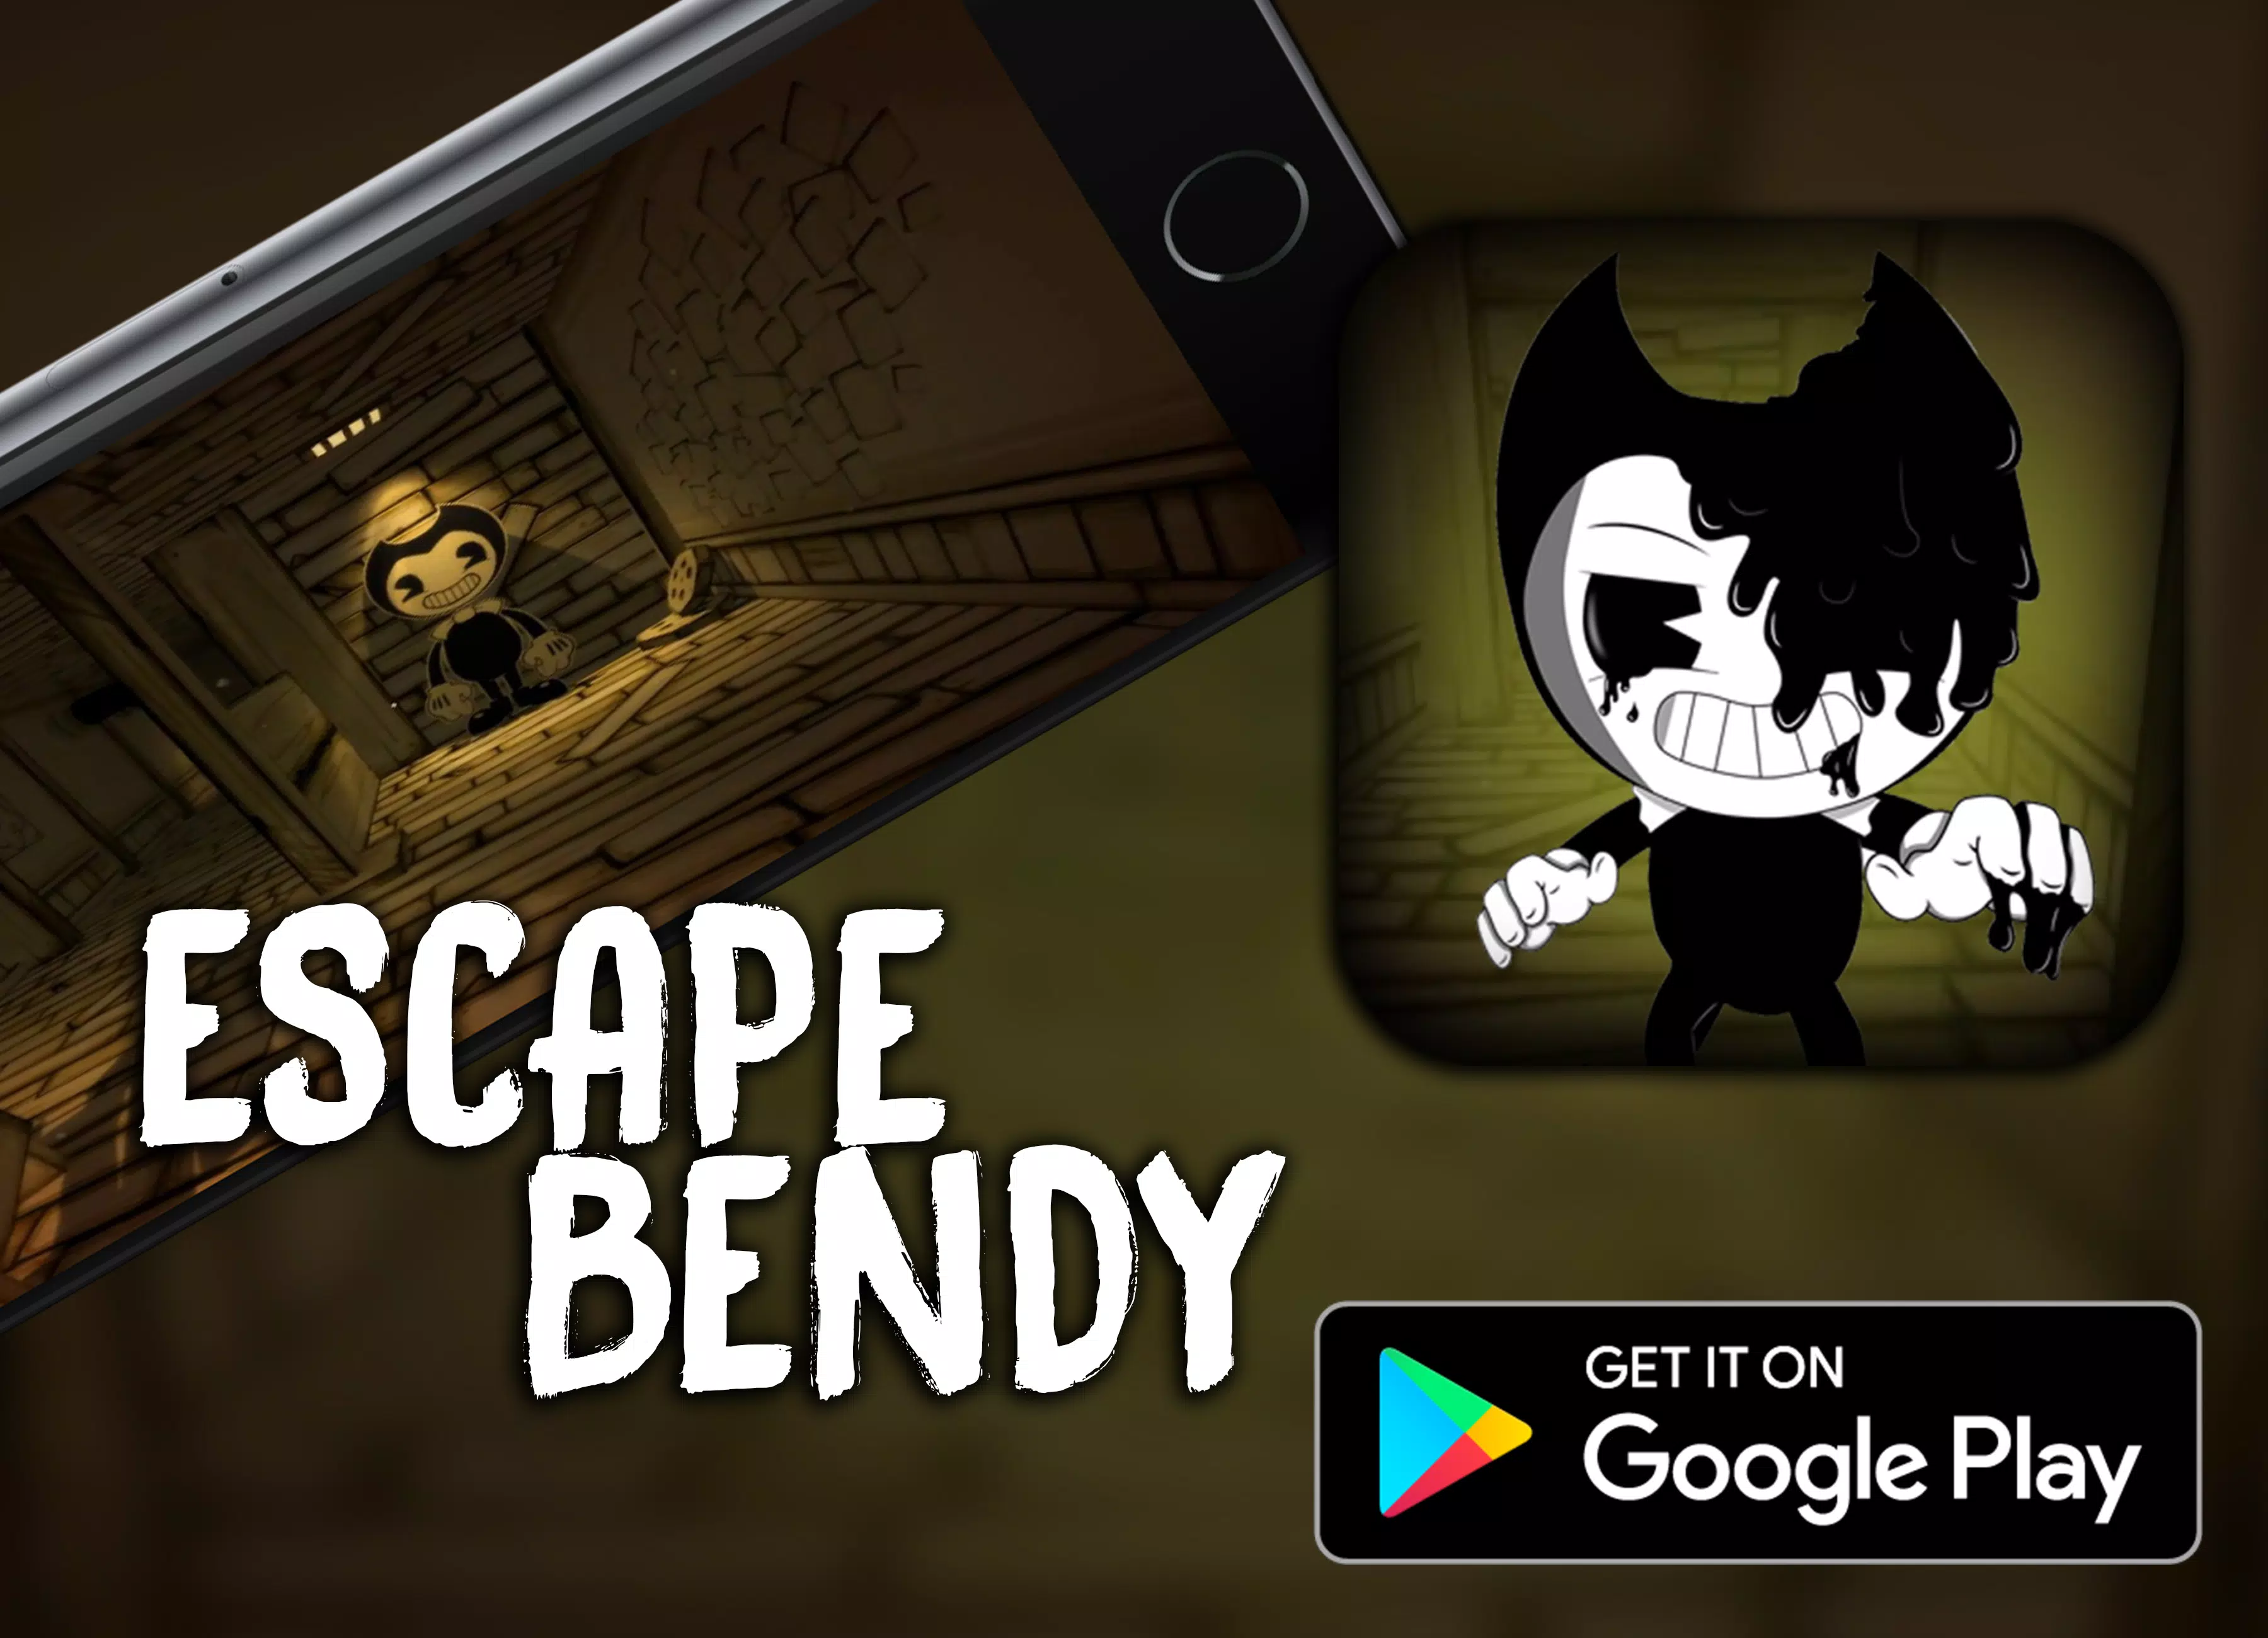 Bendy and the Ink Machine 1.0.830 (Paid for free) for Android